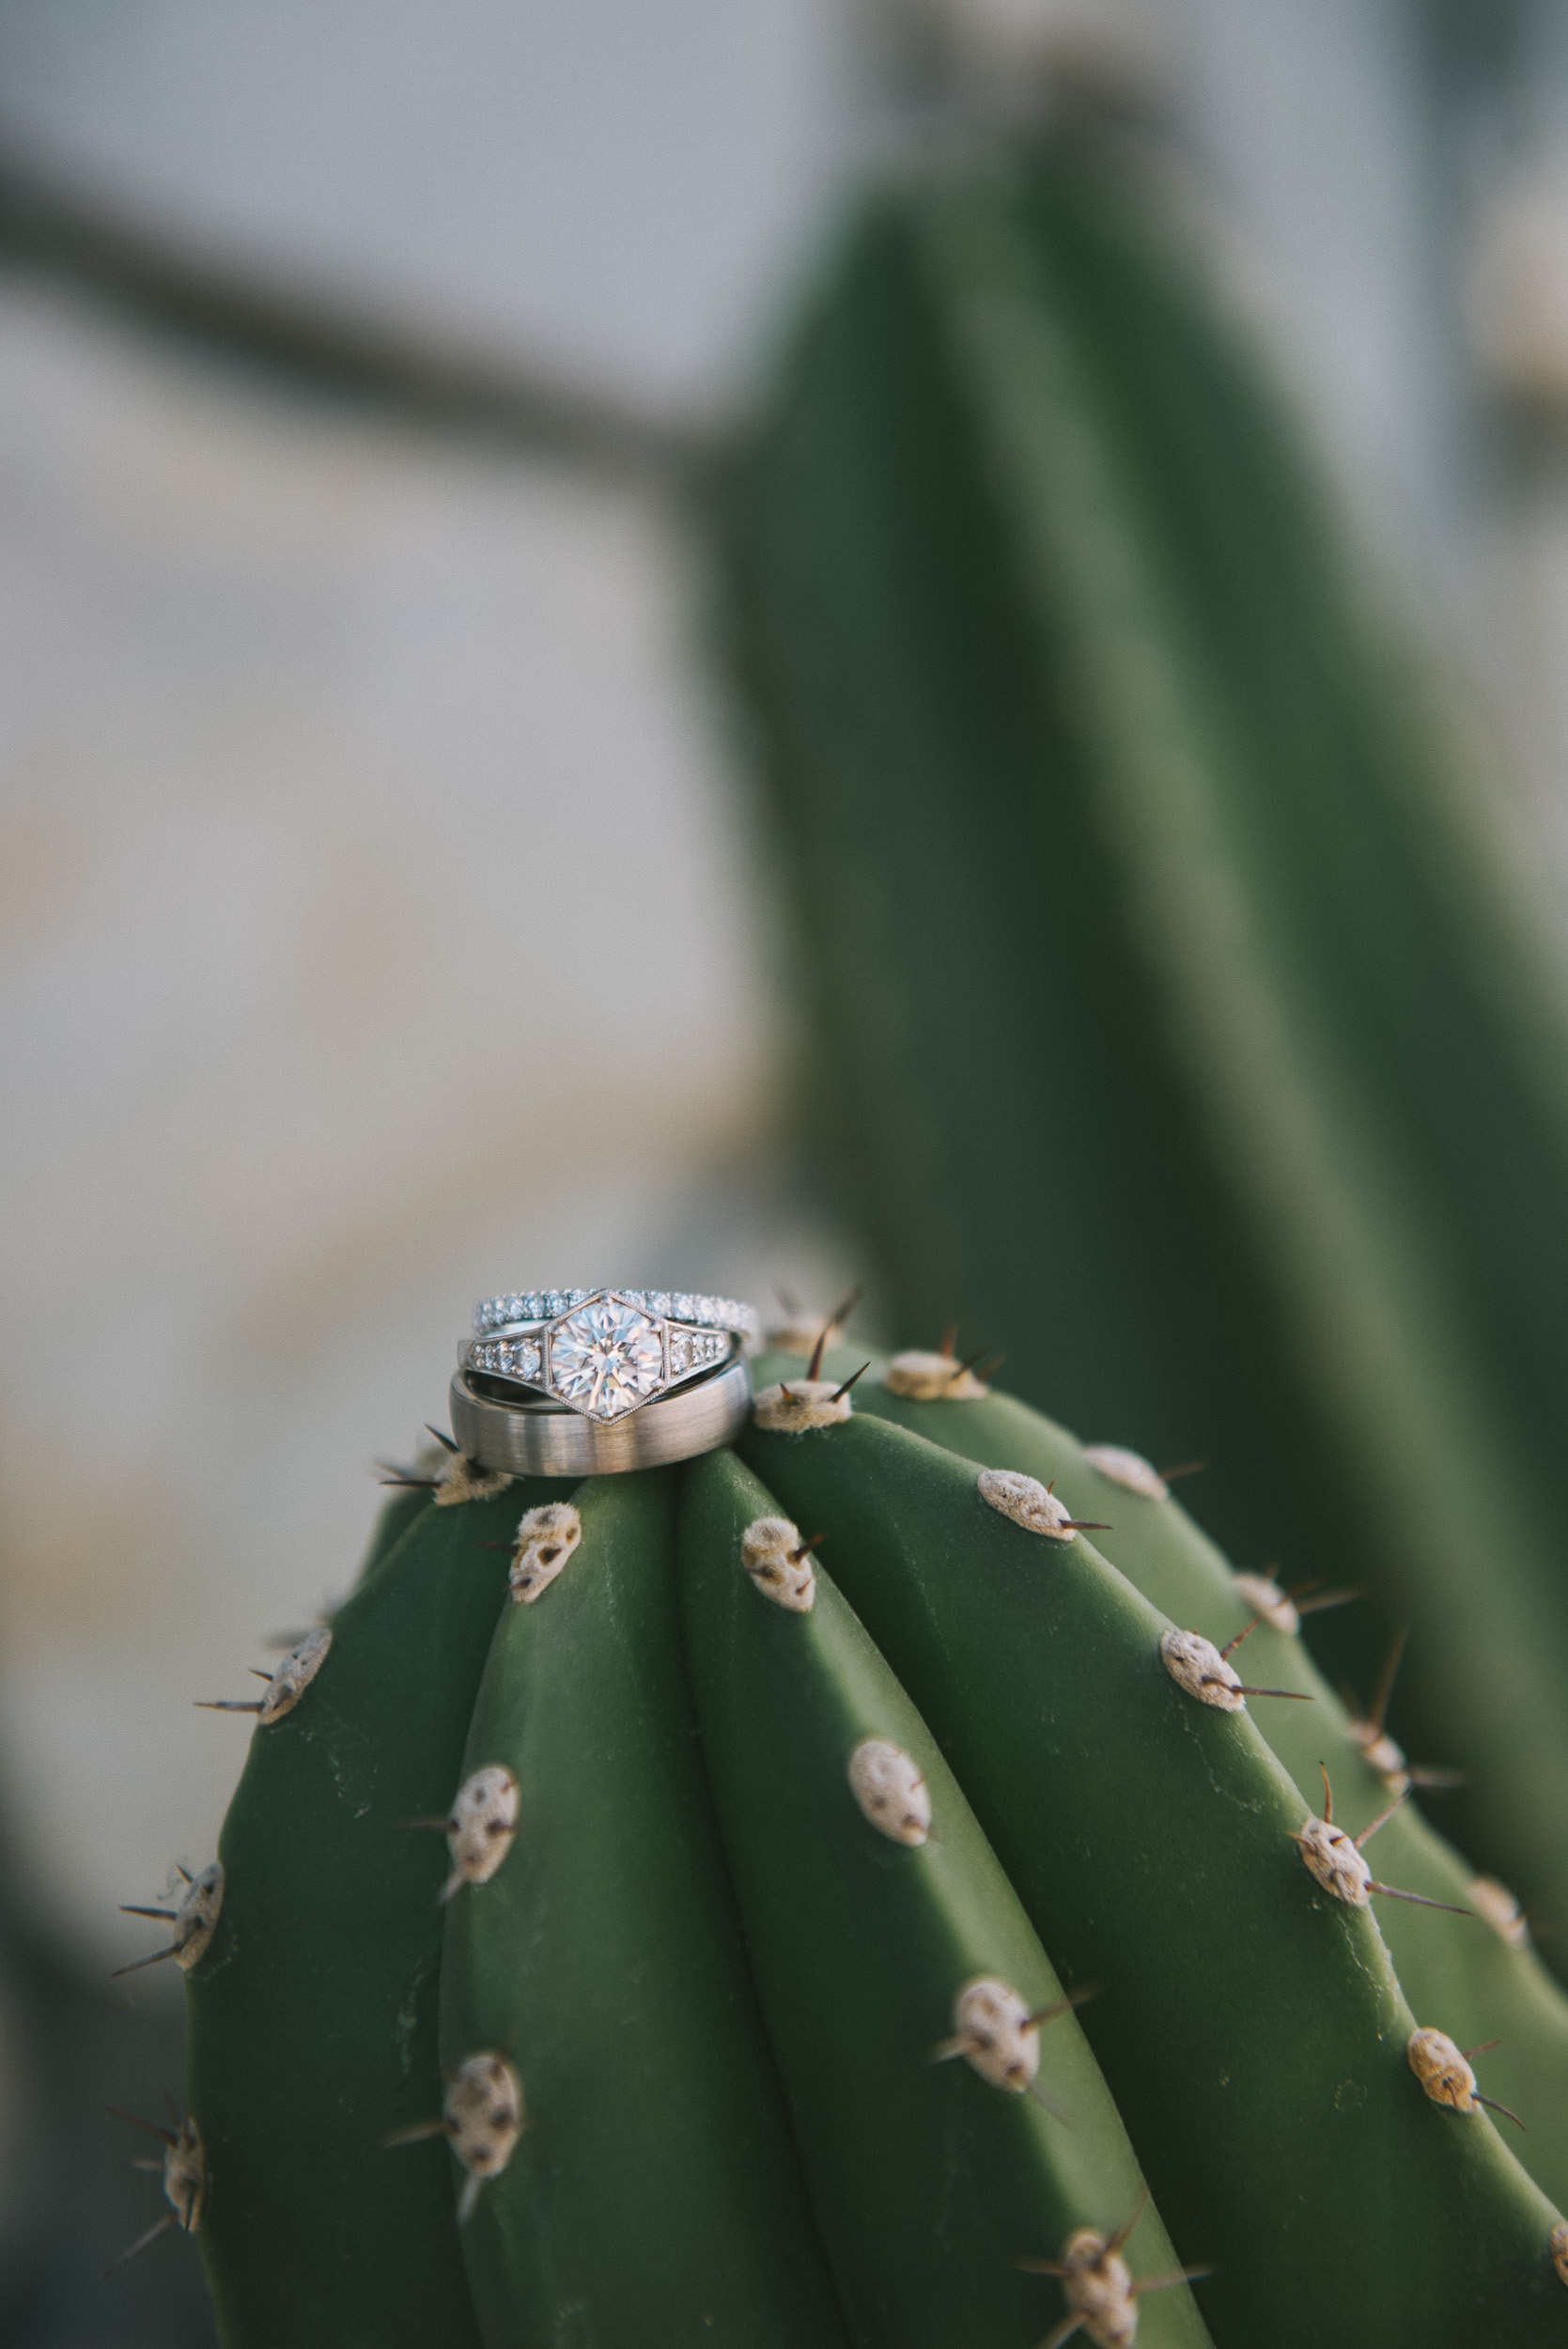 Wedding at the Ace Hotel in Palm Springs, wedding ring shot on cactus plants, desert wedding detail shots